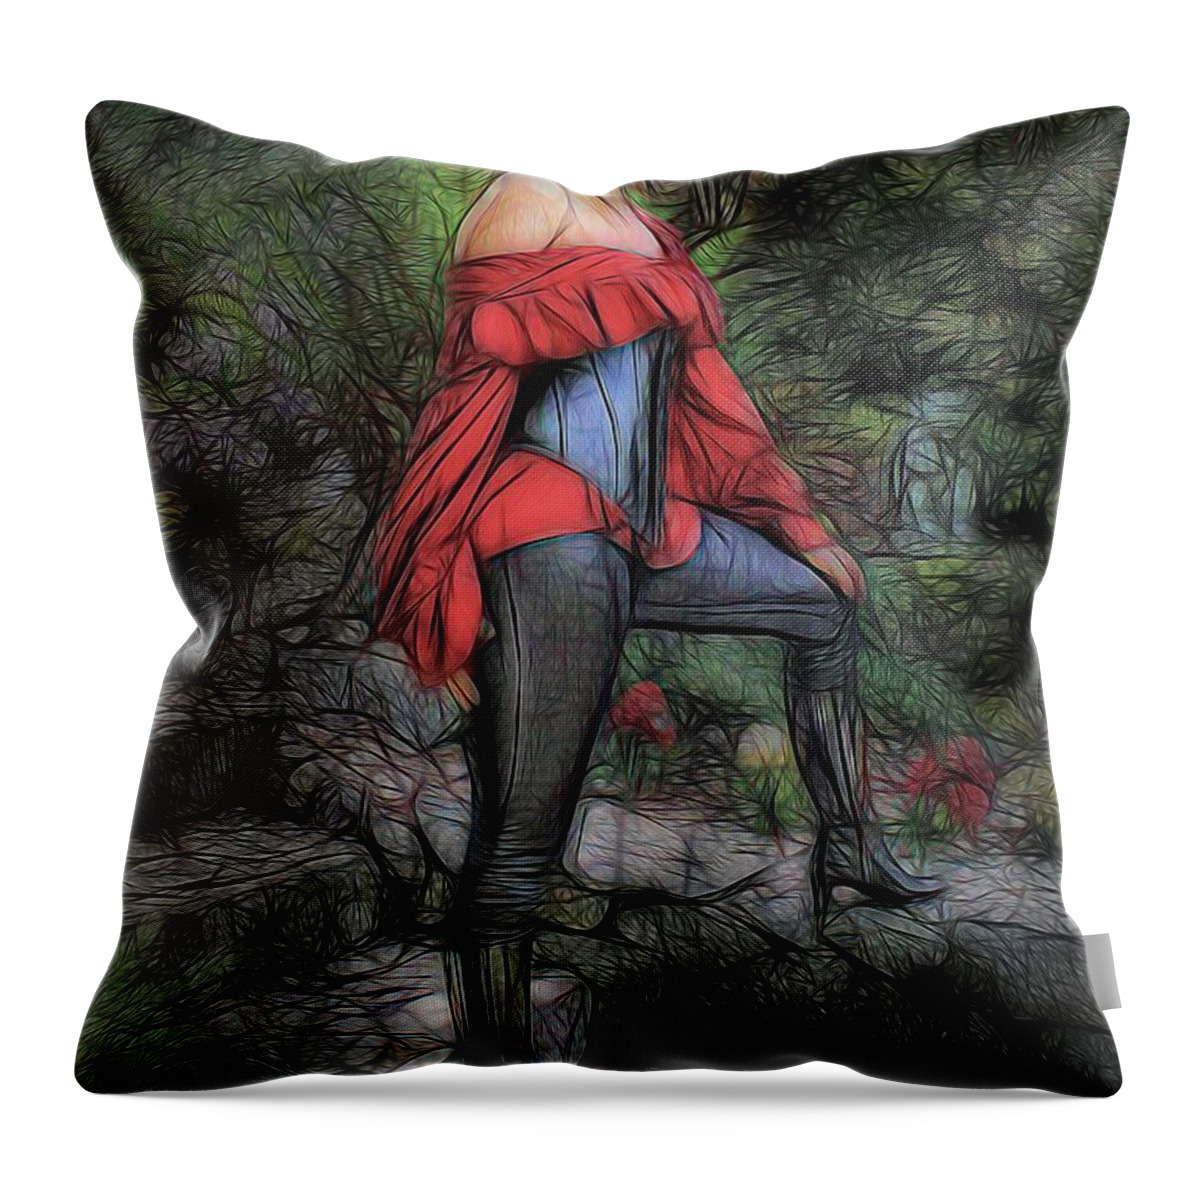 Swashbuckler Throw Pillow featuring the photograph Impression of a Swashbuckler by Jon Volden